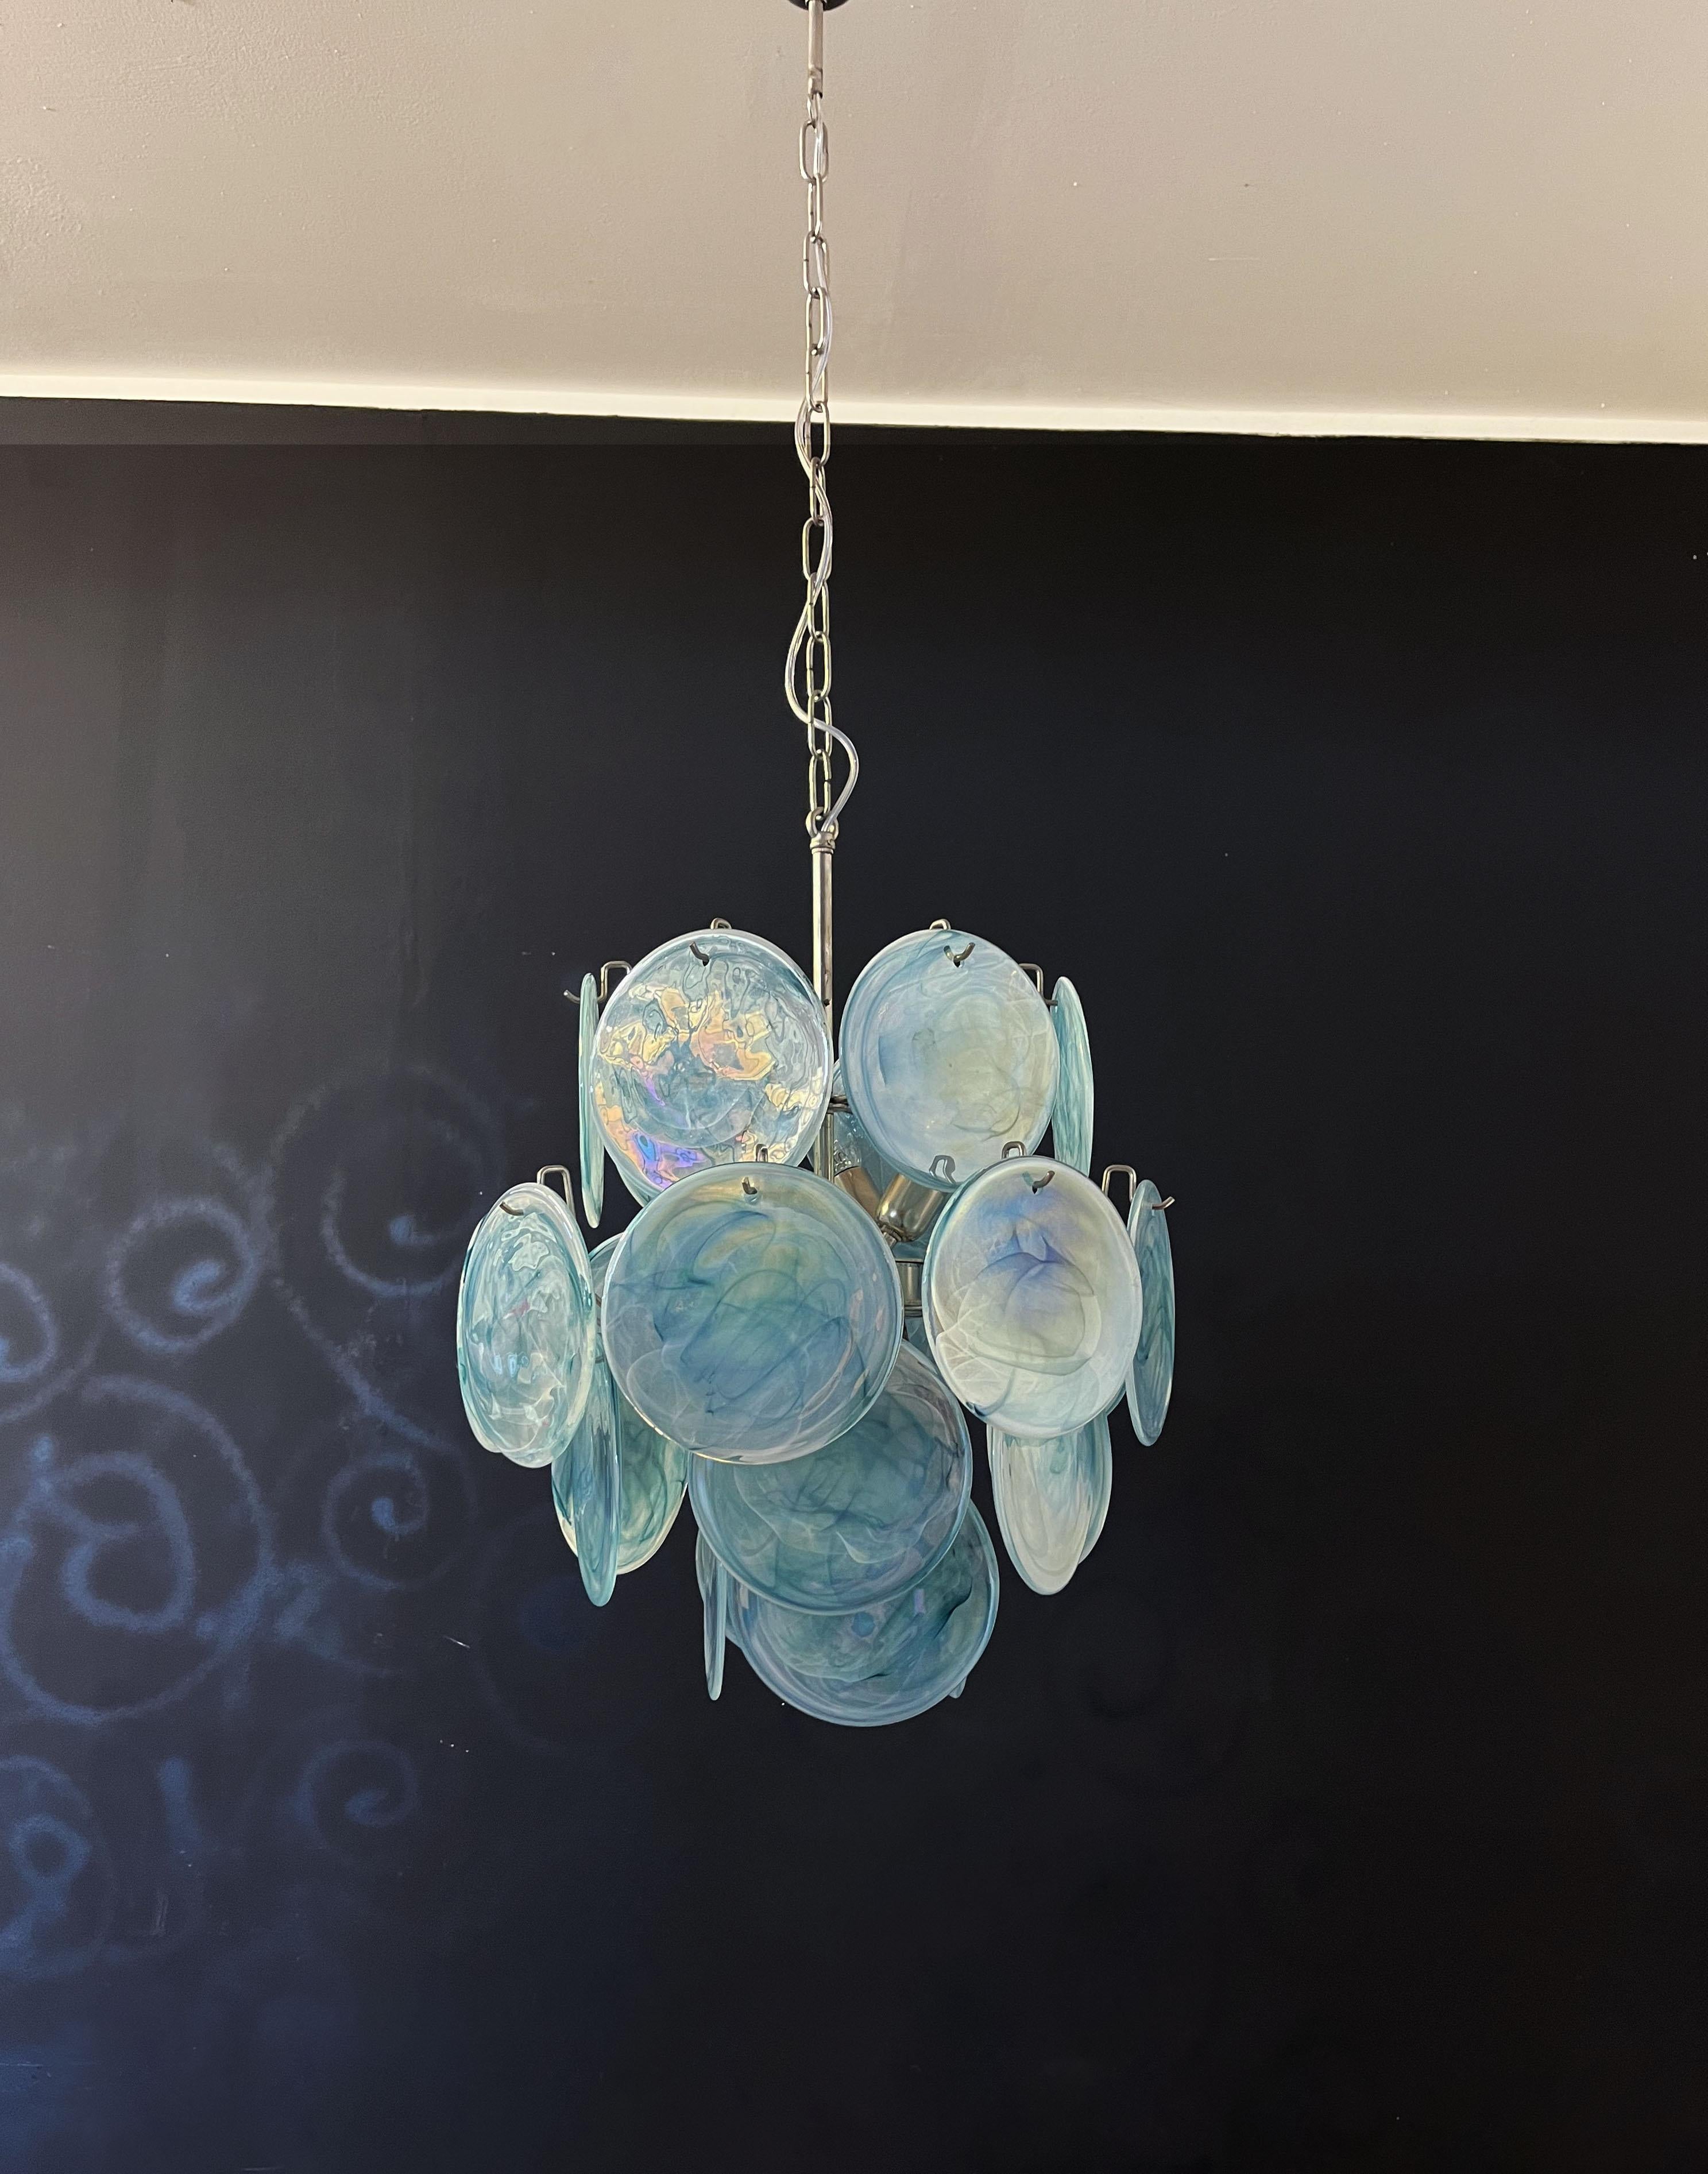 
Vintage Italian Murano chandelier in Vistosi style. The chandelier has 24 fantastic iridescent alabaster boue discs in a nickel metal frame.
Period: late XX century
Dimensions: 41,30 inches (105 cm) height with chain; 20,50 inches (52 cm) height